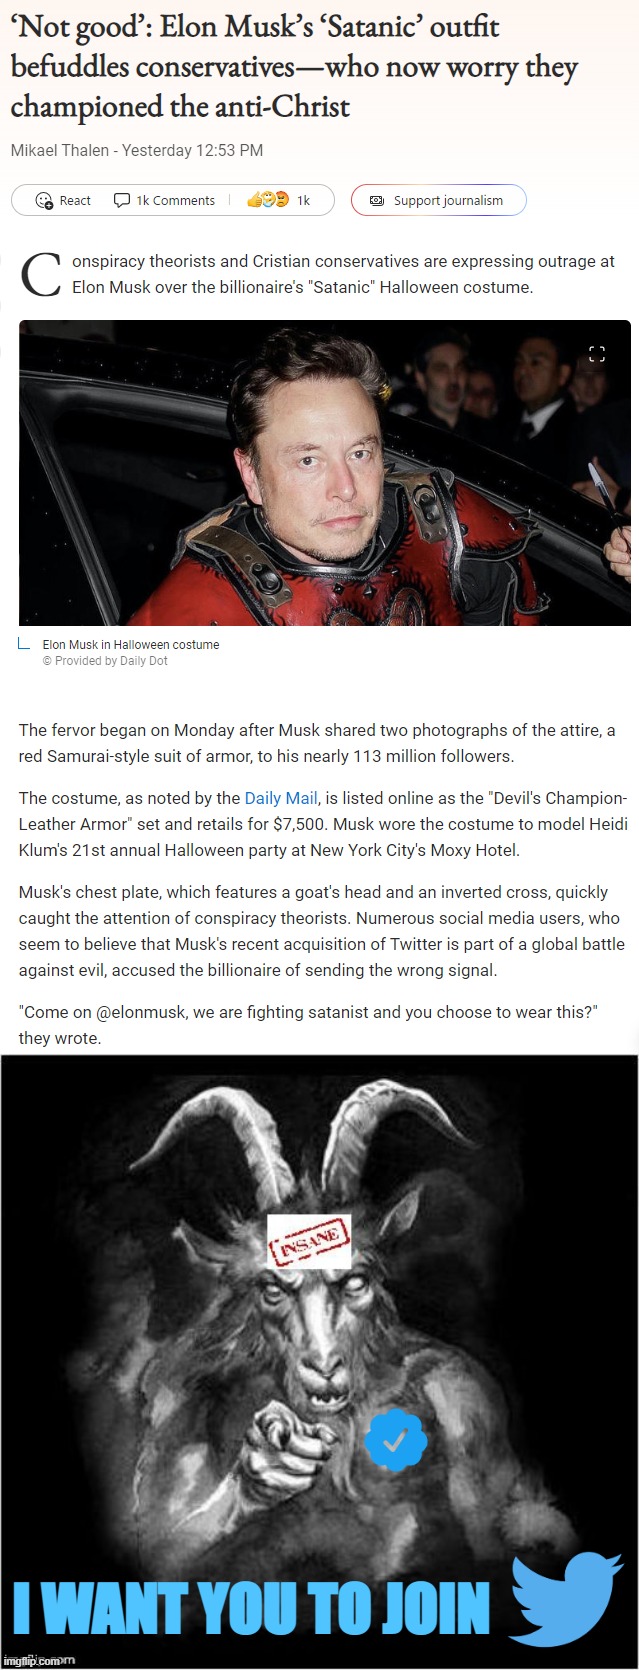 Cozy up to conspiracy theorists? They'll turn on you next. | I WANT YOU TO JOIN | image tagged in elon musk satanic costume,satan speaks,satanic,conspiracy theories,twitter,elon musk | made w/ Imgflip meme maker